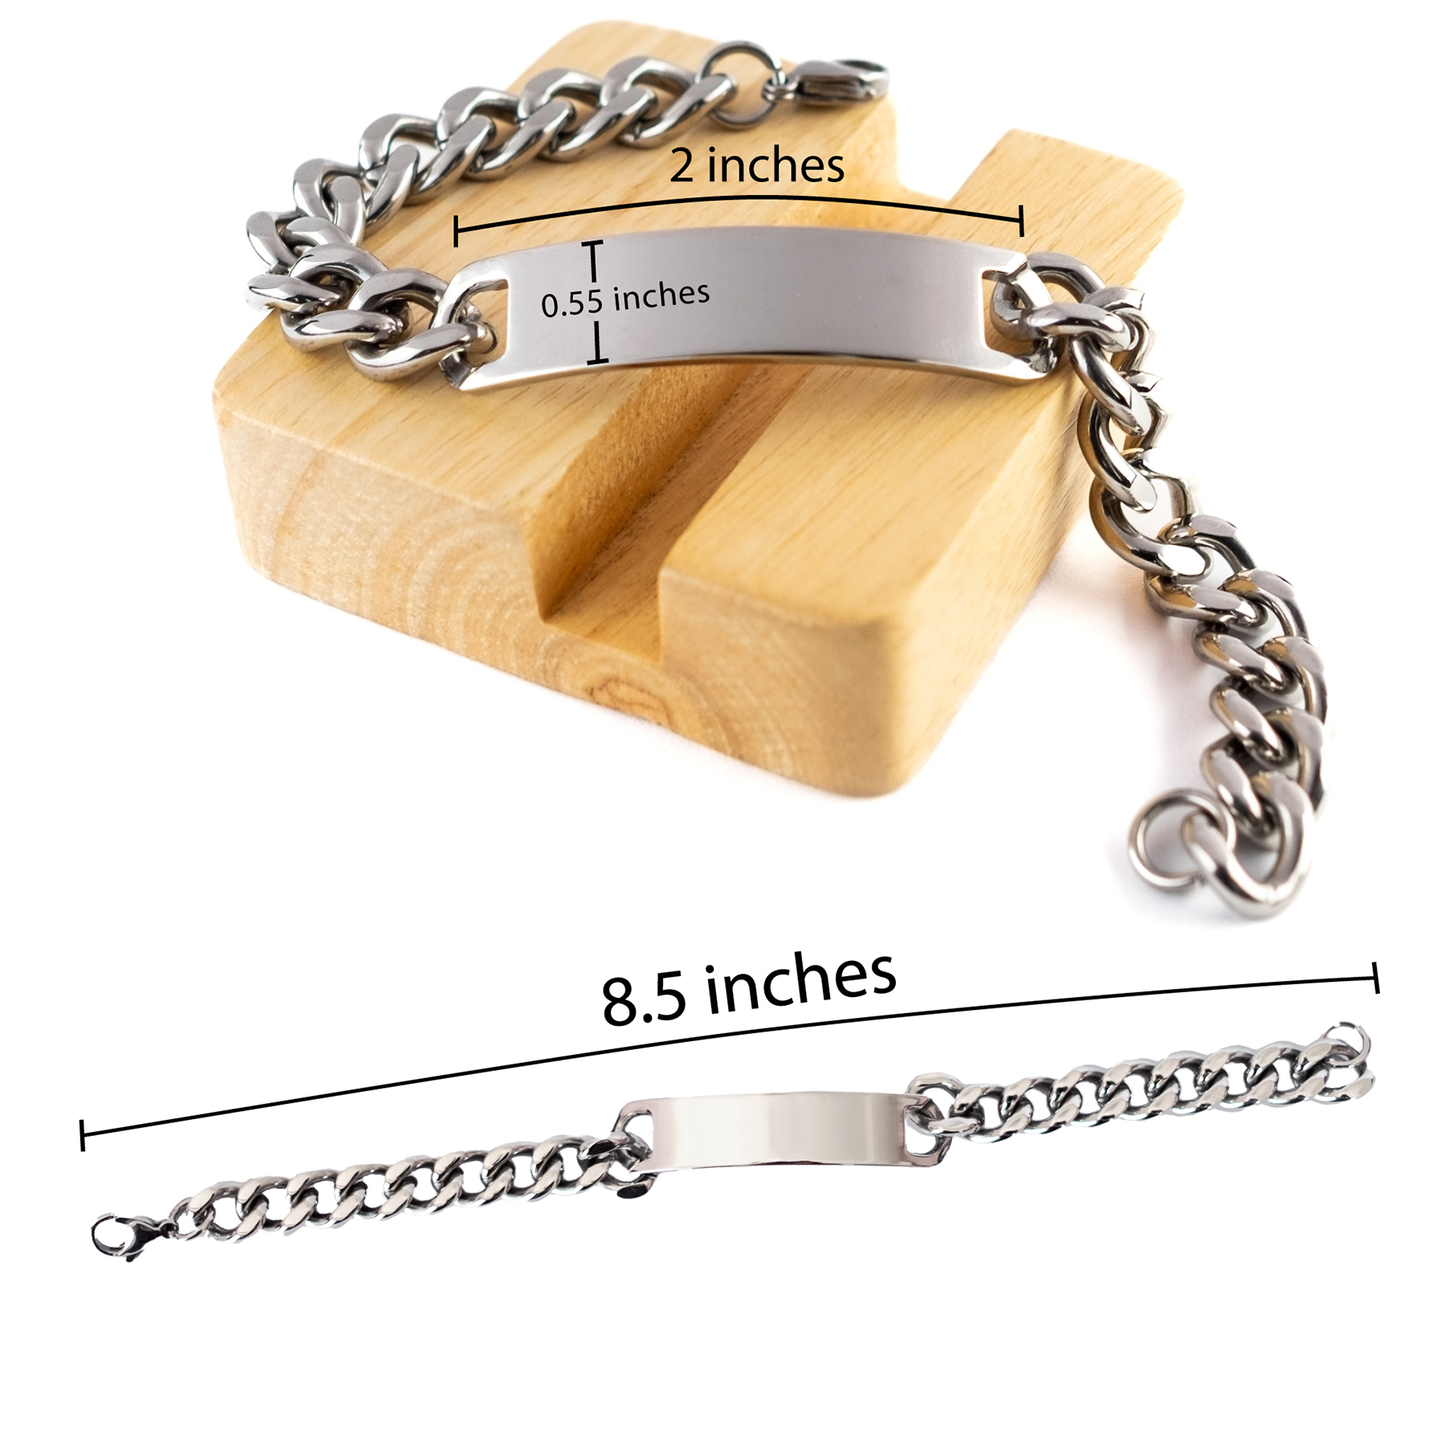 Daughter Motivational Gifts from Dad, Remember to never give up no matter what, Inspirational Birthday Cuban Chain Stainless Steel Bracelet for Daughter